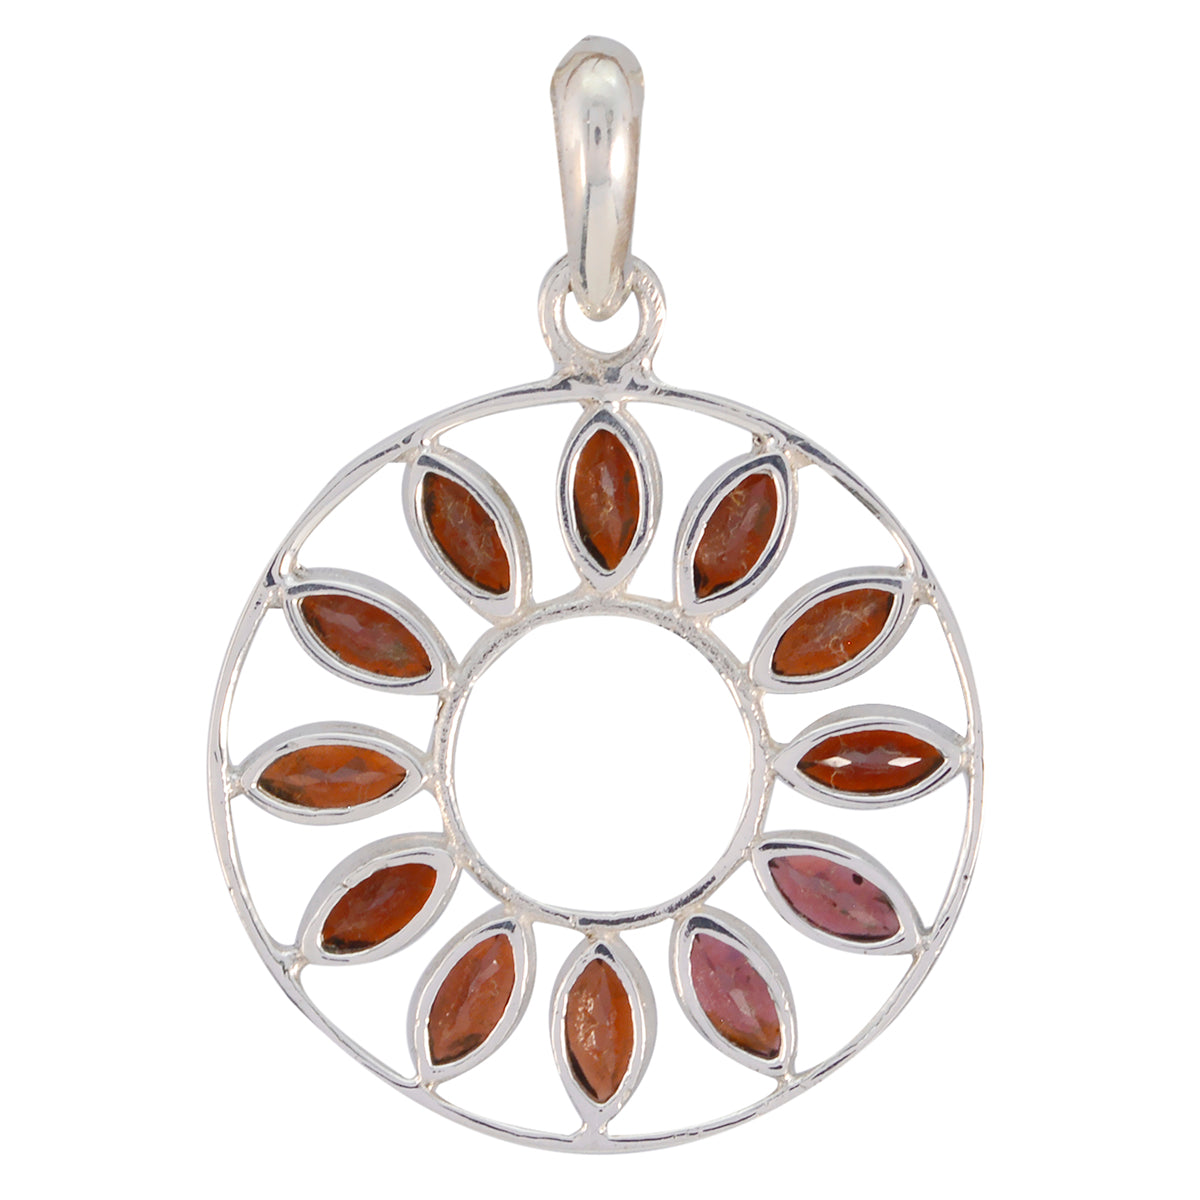 Riyo Genuine Gems Marquise Faceted Red Garnet Sterling Silver Pendant gift for Faishonable day